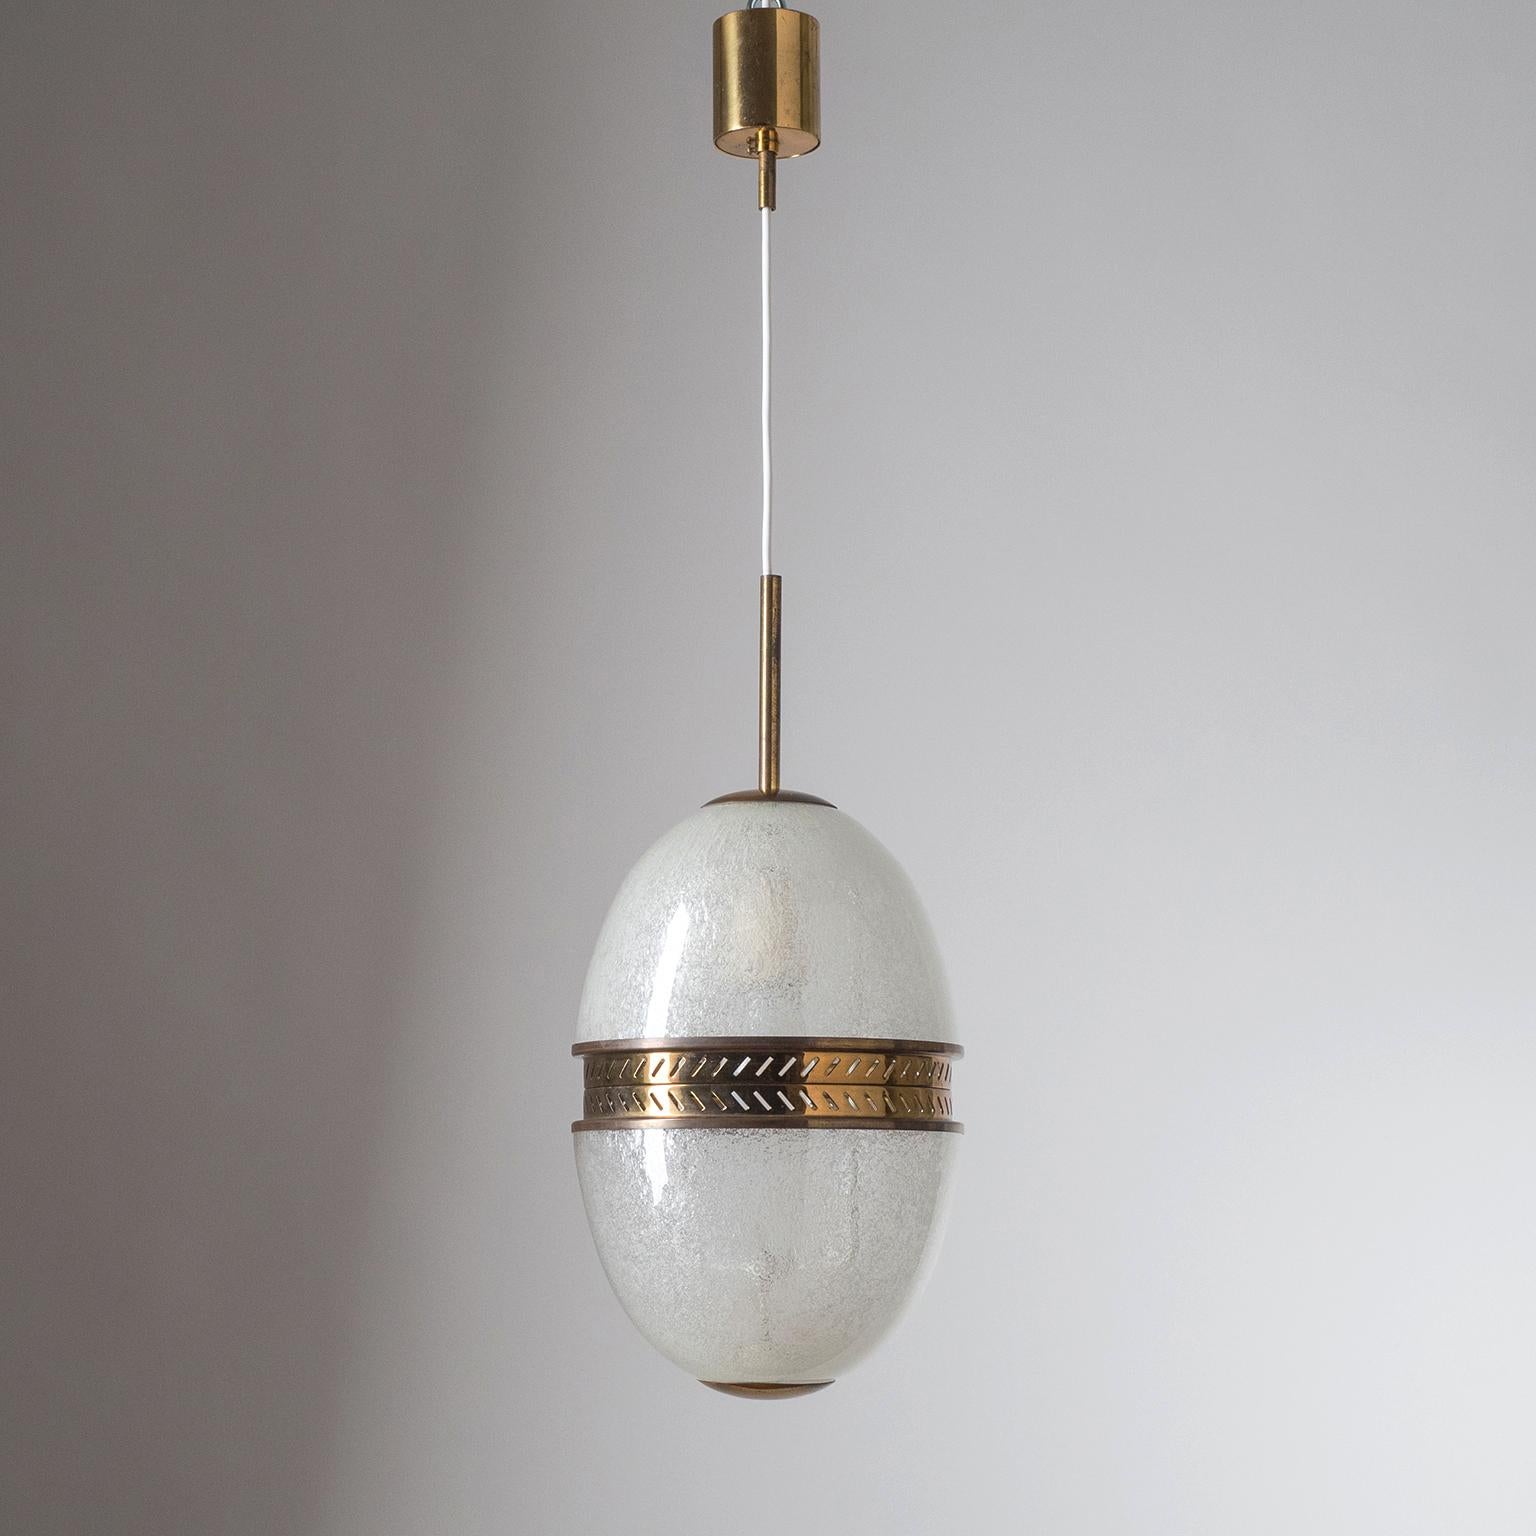 Rare Italian pendant attributed to Stilnovo, 1950s. Dual Murano glass diffuser in pulegoso technique. One original brass and ceramic E27 socket with new wiring. Height without cable 18inches/46cm (13inches/34cm without stem). Drop height adjustable